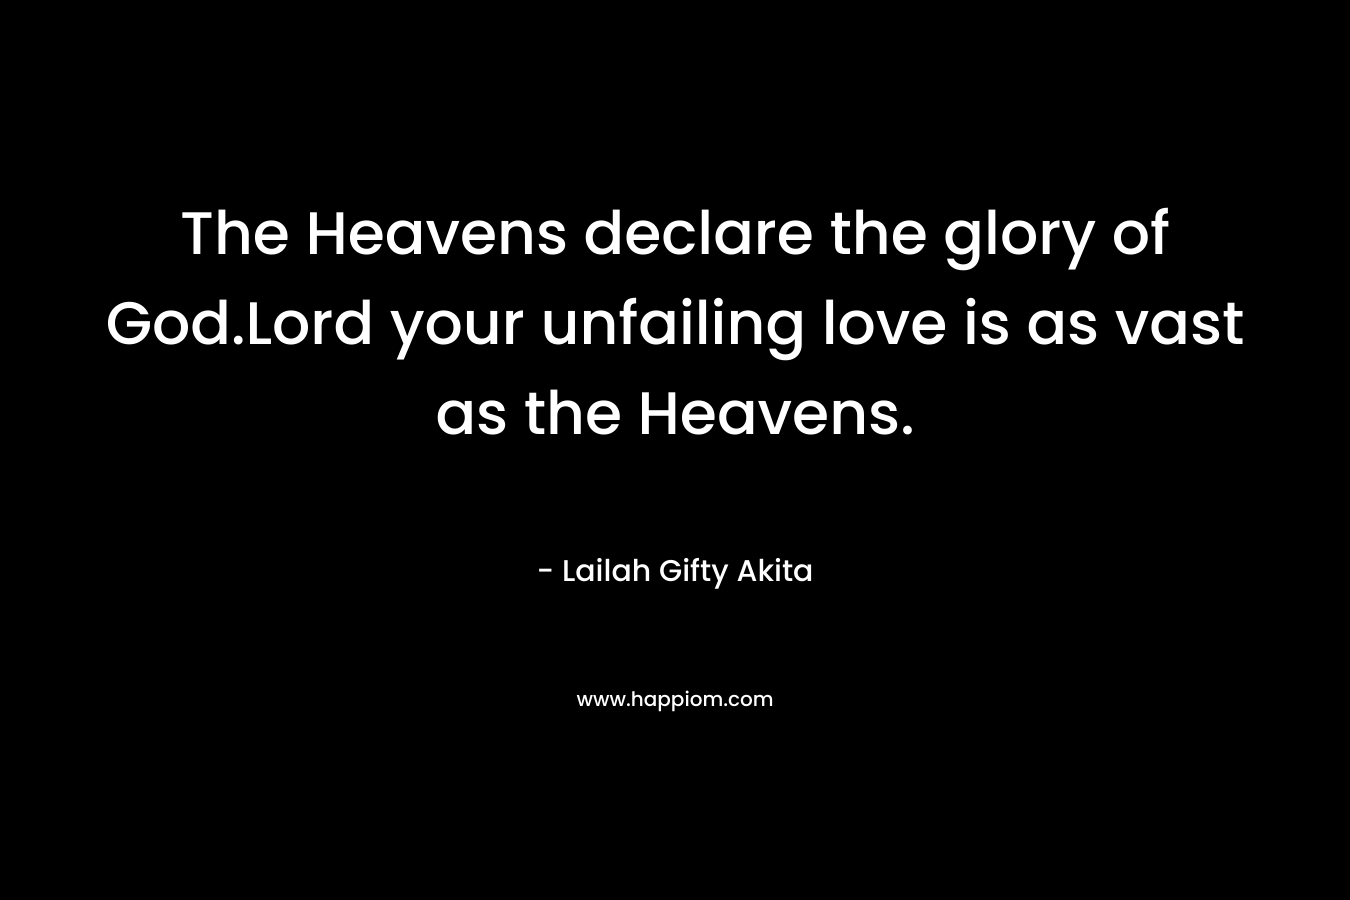 The Heavens declare the glory of God.Lord your unfailing love is as vast as the Heavens.